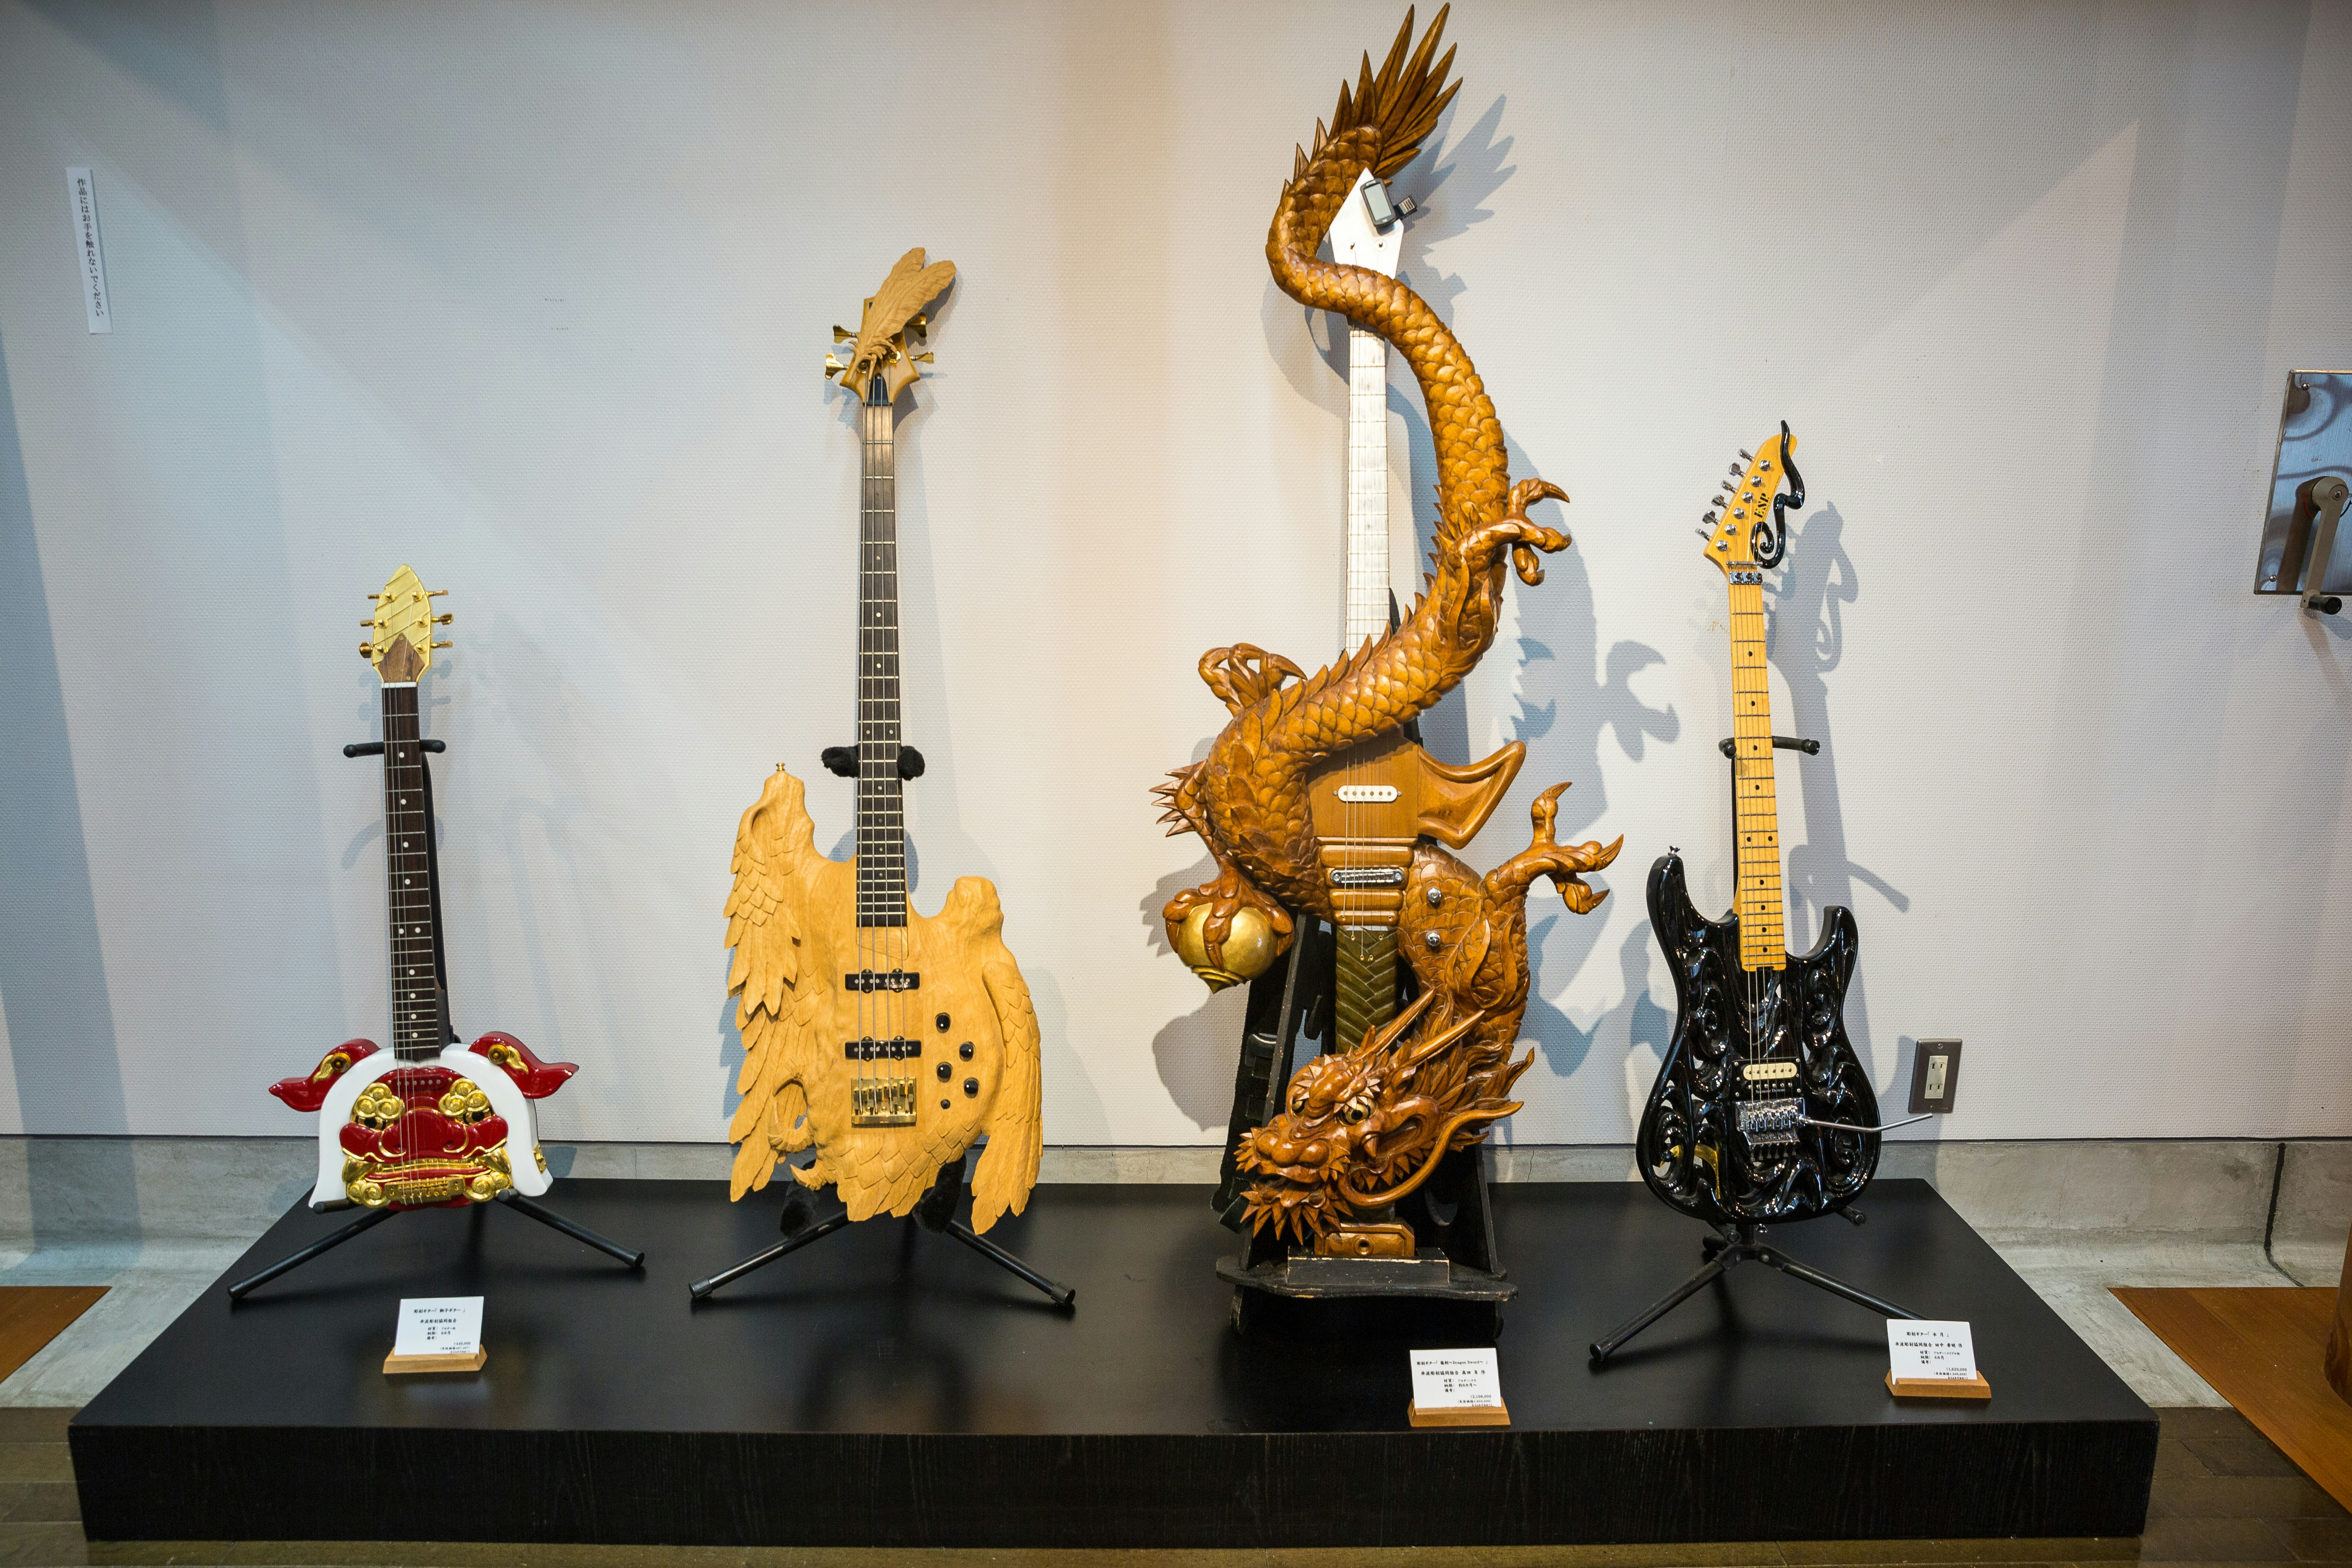 Four electric guitars lean on stands, each with intricate wooden designs. One is an elaborate dragon which goes all the way up the neck of the guitar